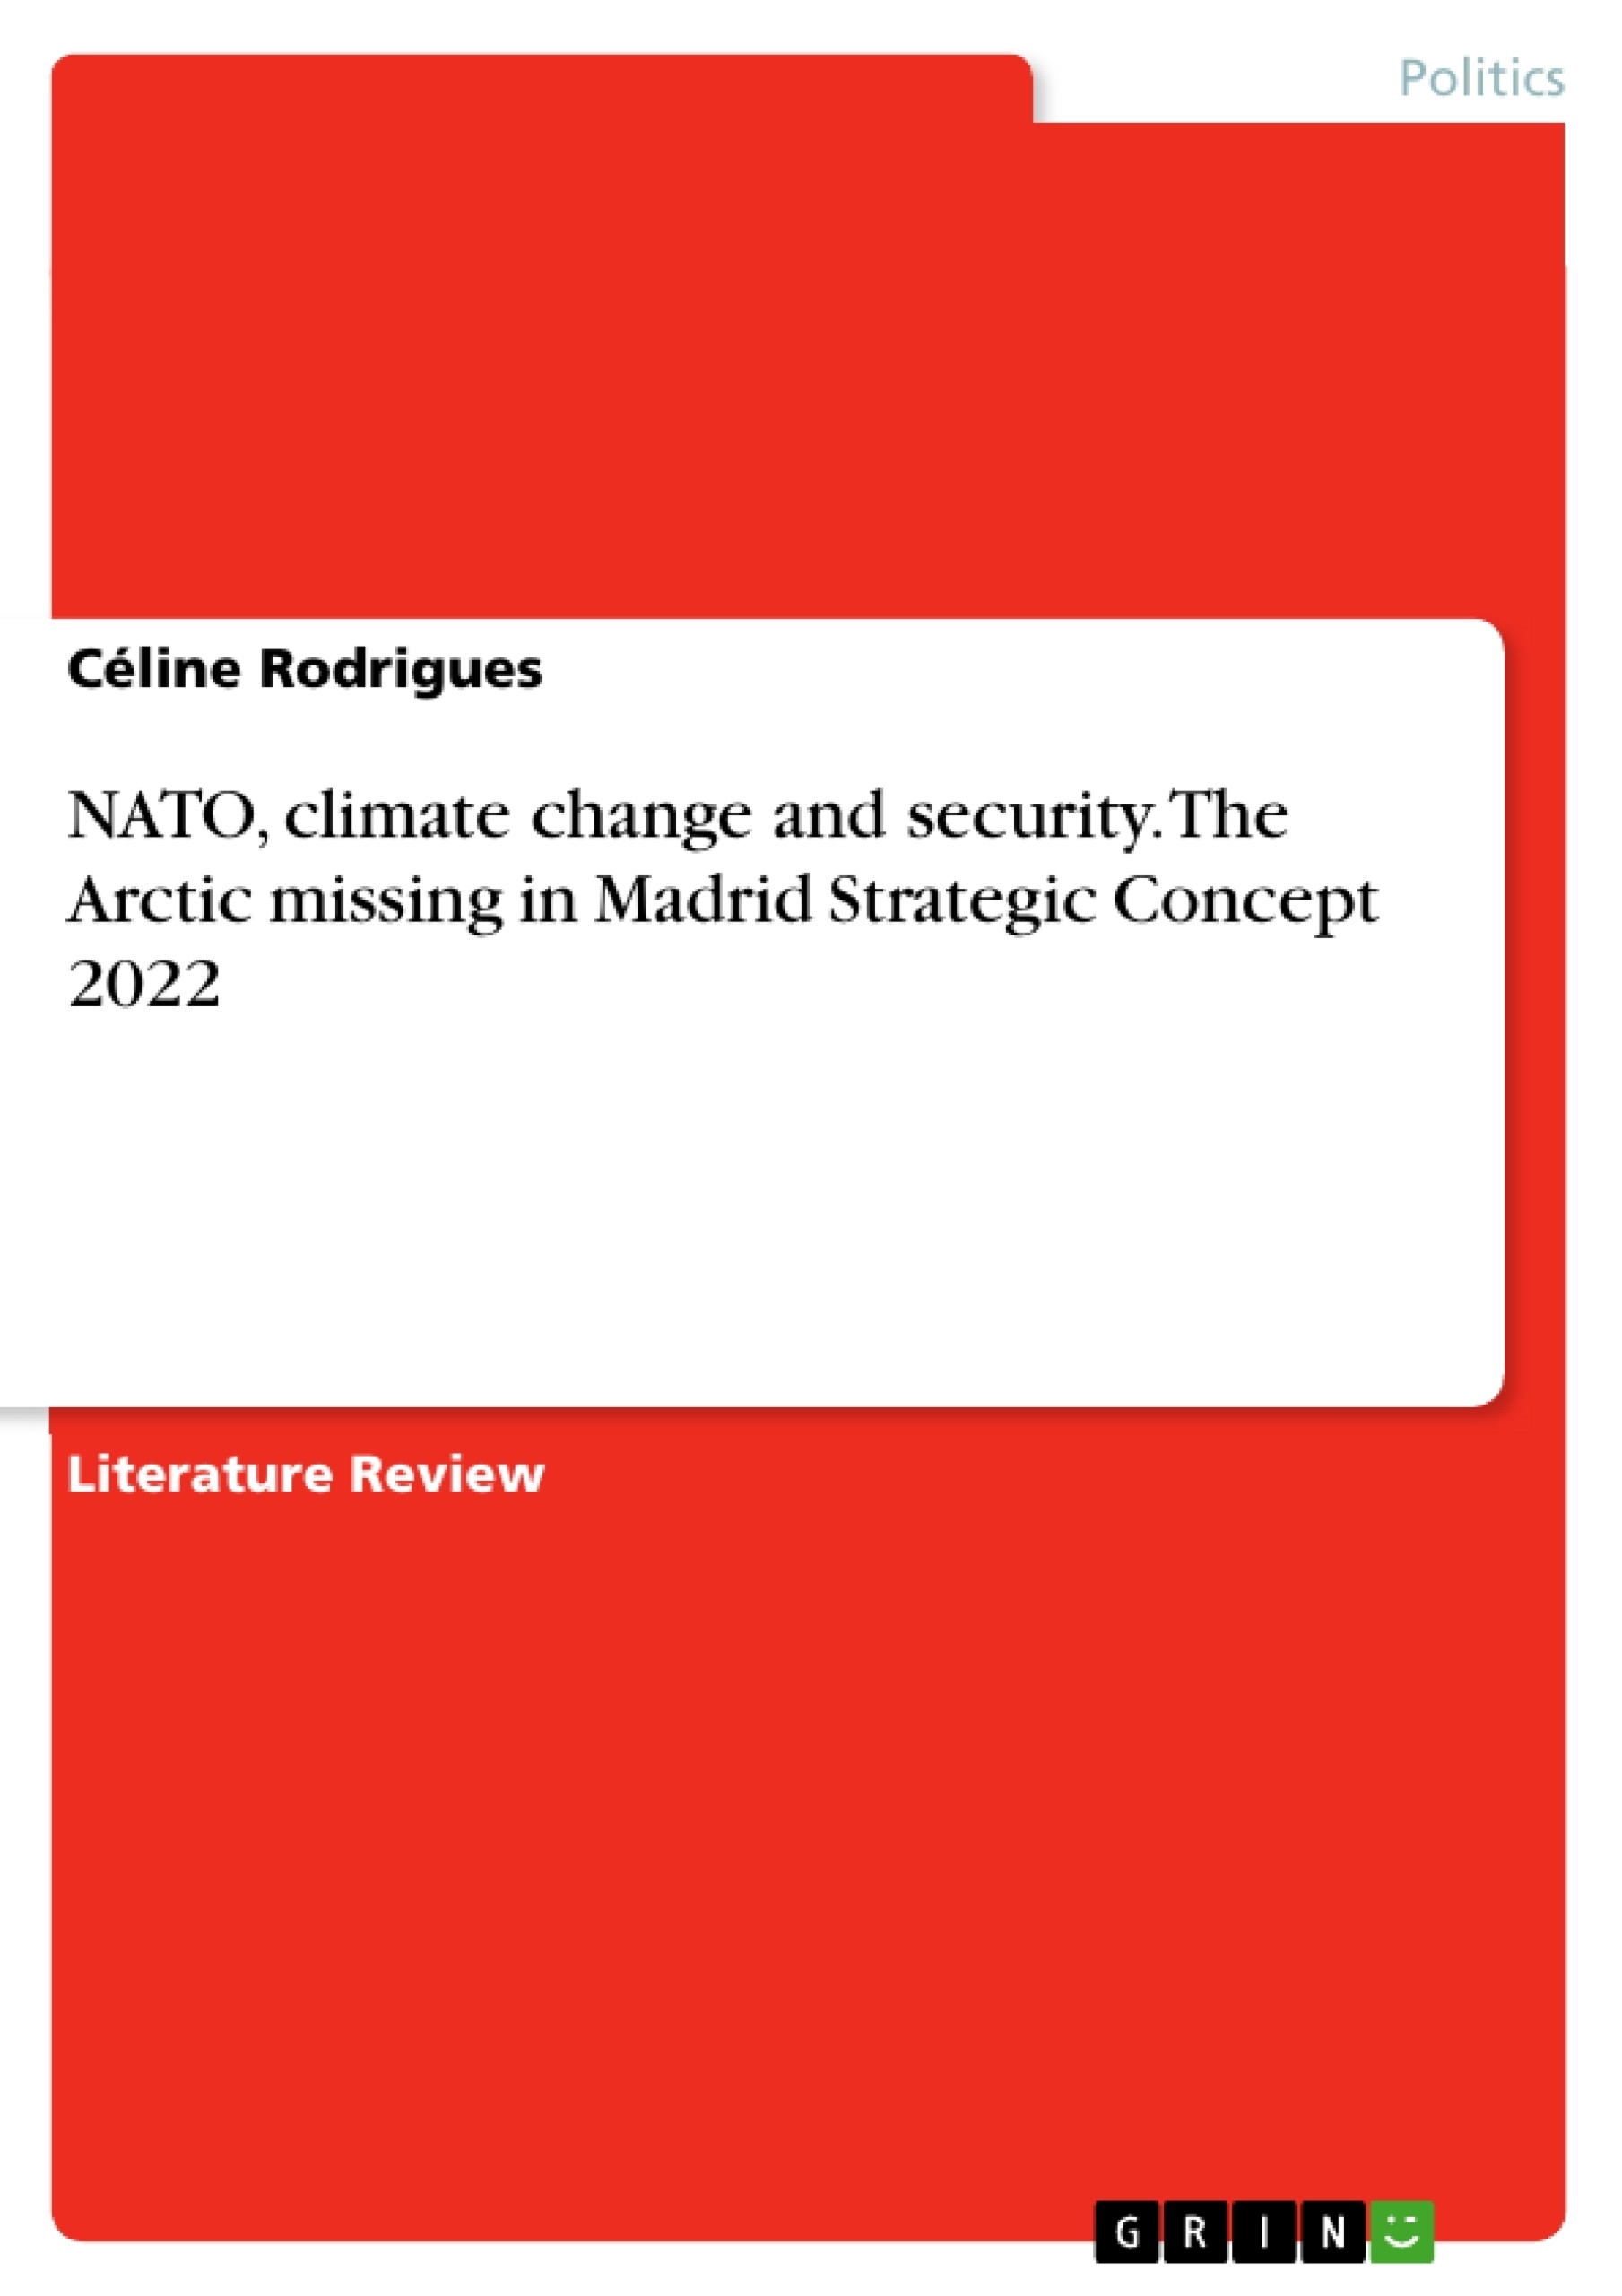 Title: NATO, climate change and security. The Arctic missing in Madrid Strategic Concept 2022